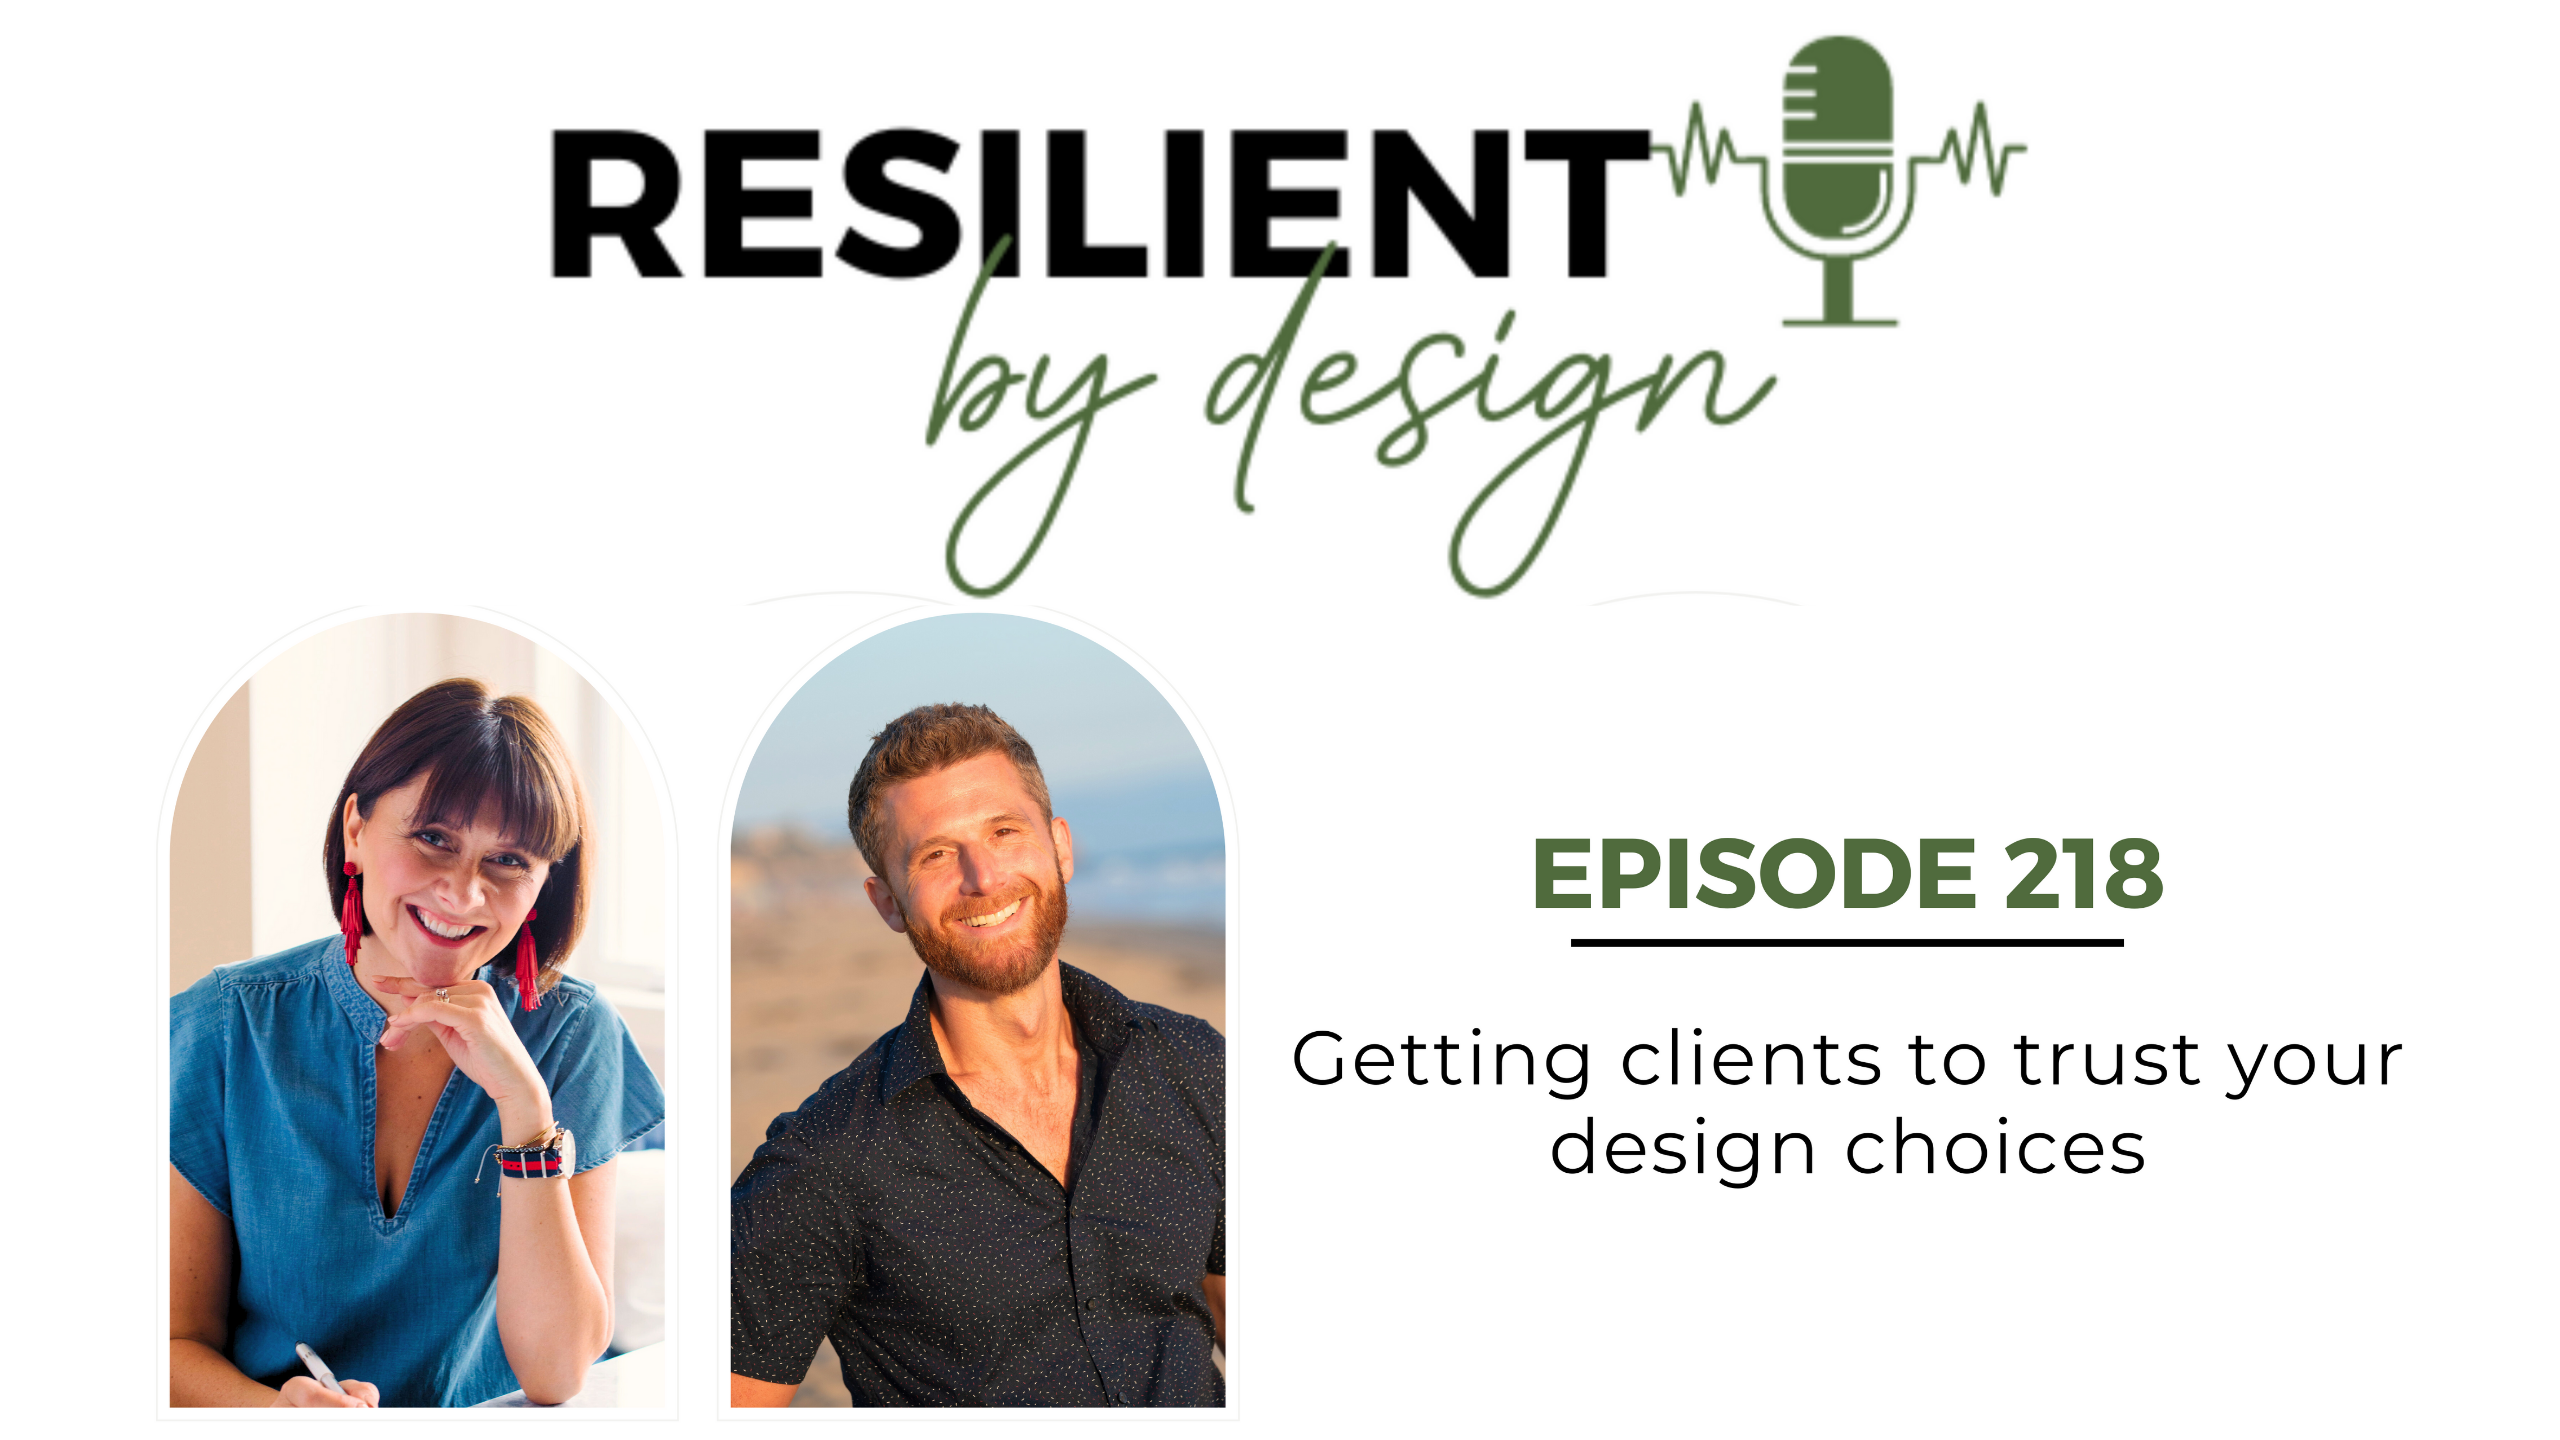 Podcast cover for "Resilient by Design" episode 218, titled "Getting clients to trust your design choices." It shows two speakers, a woman on the left and a man on the right, against a white background with a green microphone icon.